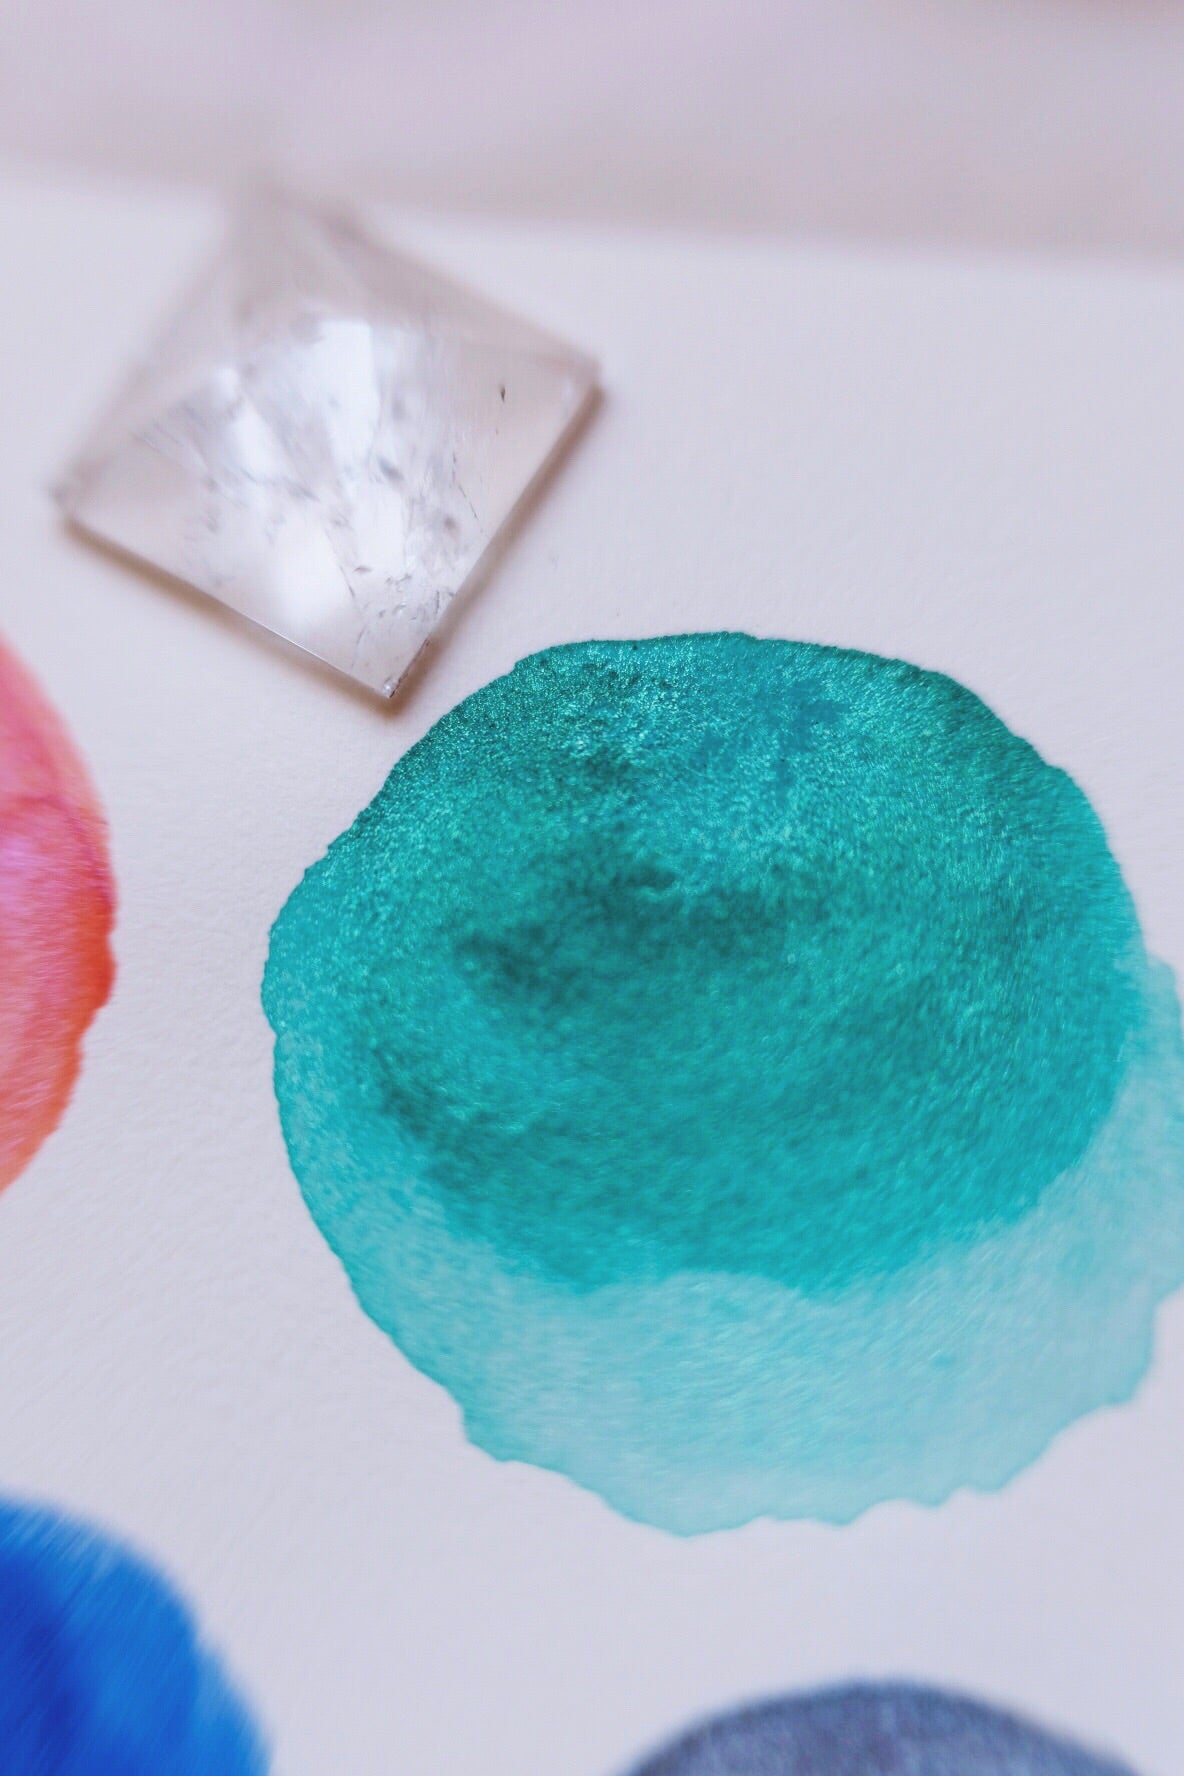 RESERVE for Suzanna + Moons of Saturn + Limited Edition Mineral shimmer watercolor palette